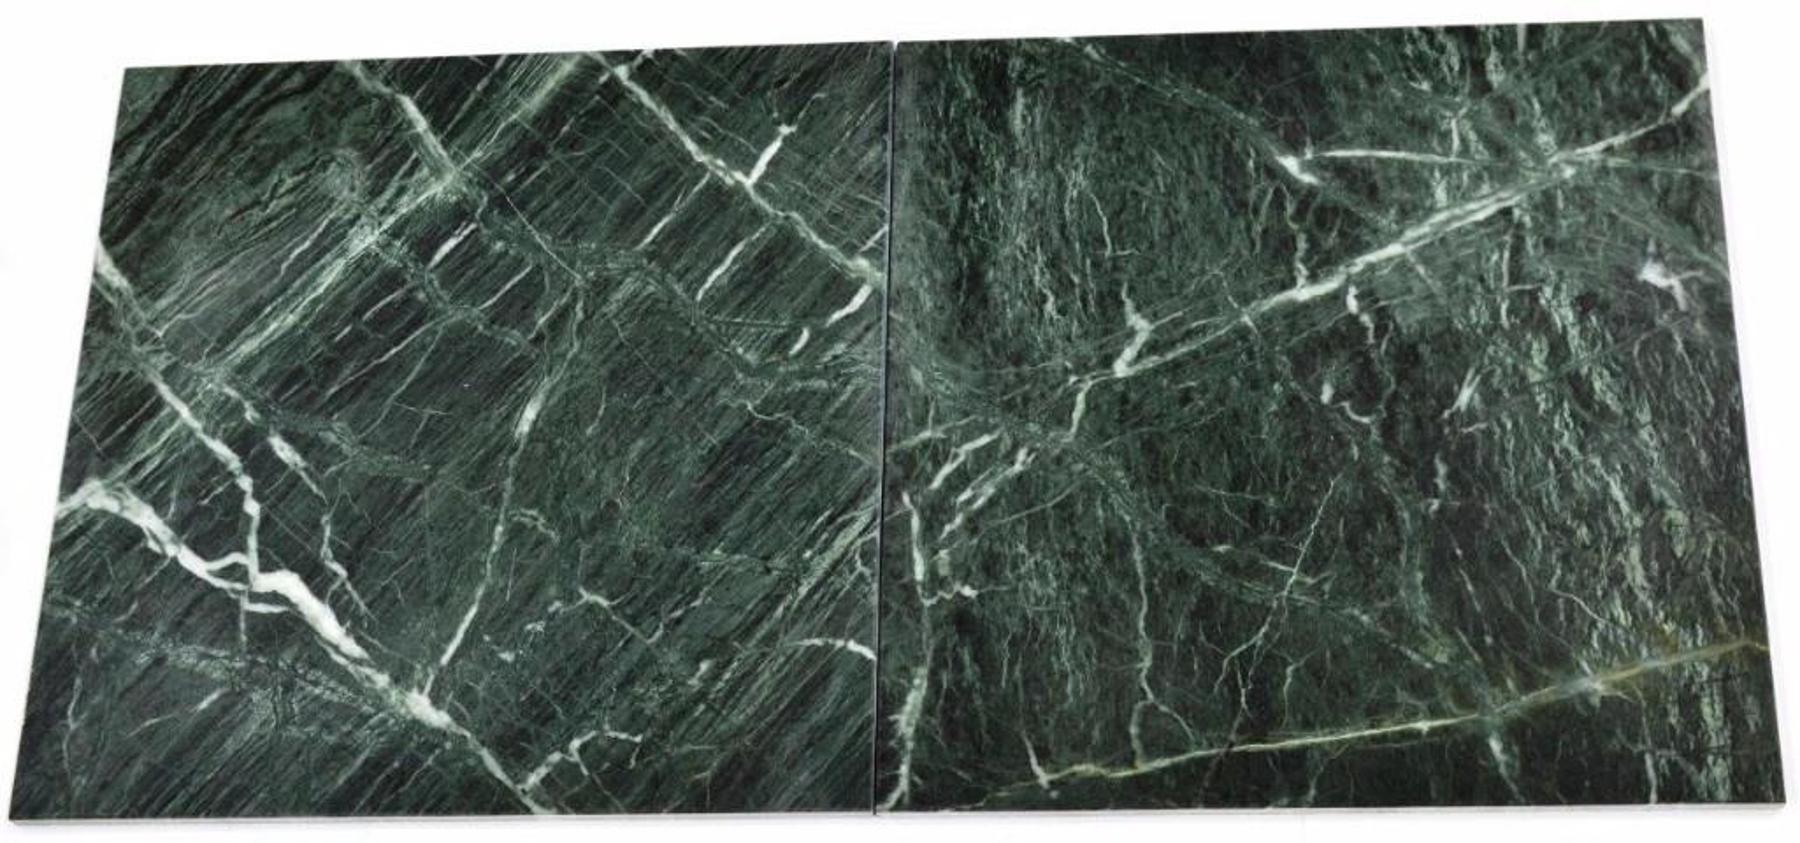 New Granite and Marble Tile Overstock